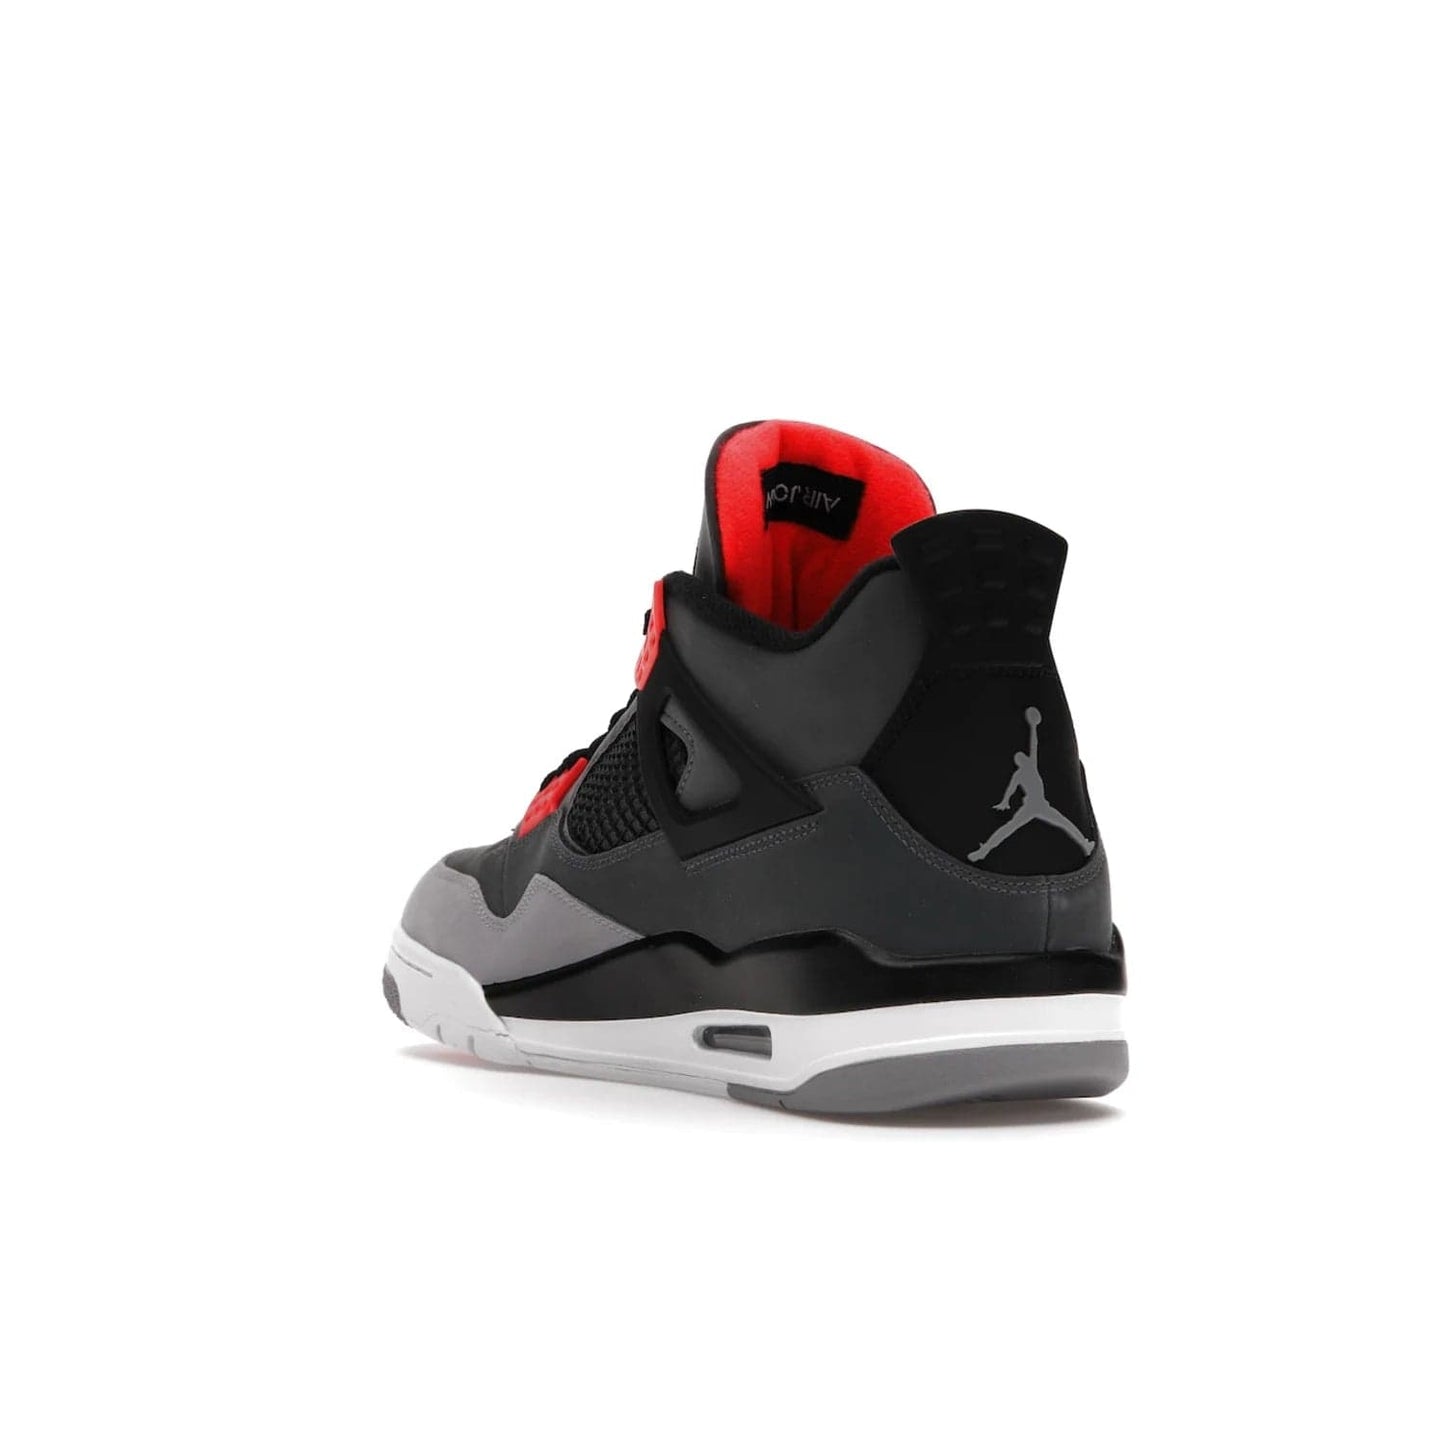 Jordan 4 Retro Infrared - Image 25 - Only at www.BallersClubKickz.com - Introducing the classic & timeless Air Jordan 4 Infrared. Durabuck upper, TPU mesh inserts, tech straps & heel tabs in dark grey and infrared accents. White sole with visible Air units. Out June 15, 2022. Get your pair now!